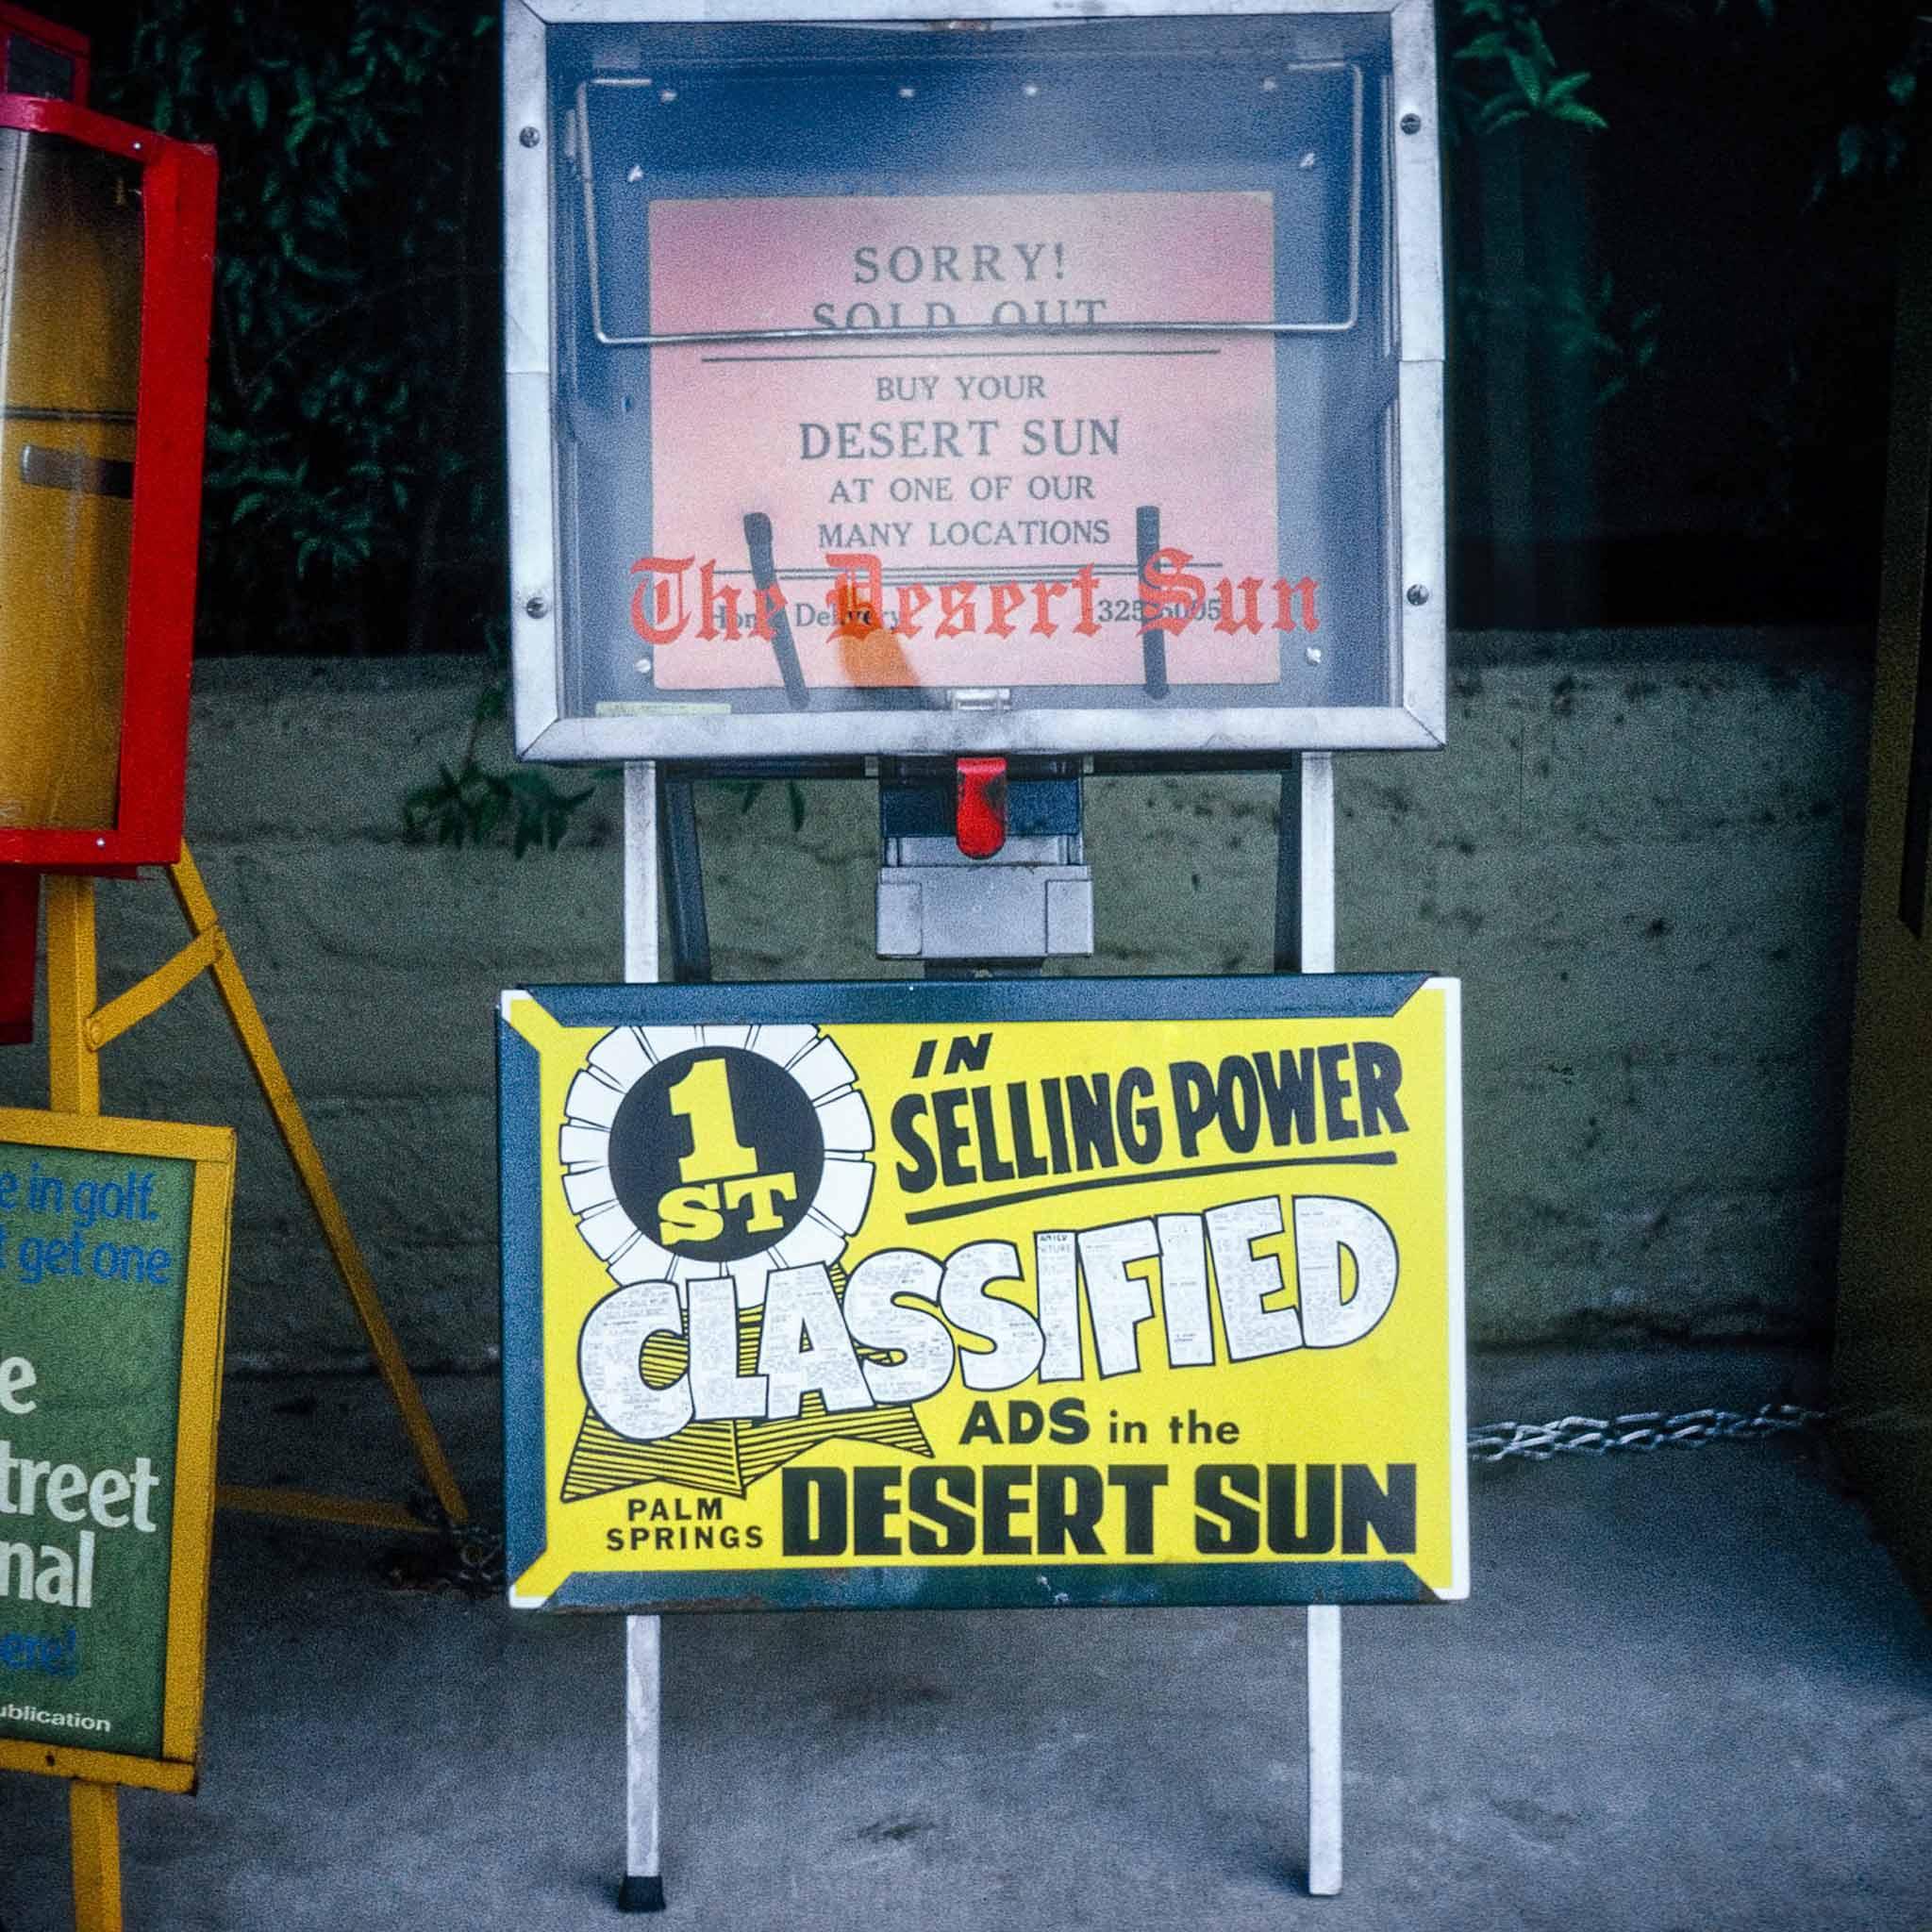 A sign in front of a newspaper box that says "1st in Selling Power Classified Ads in the Desert Sun"